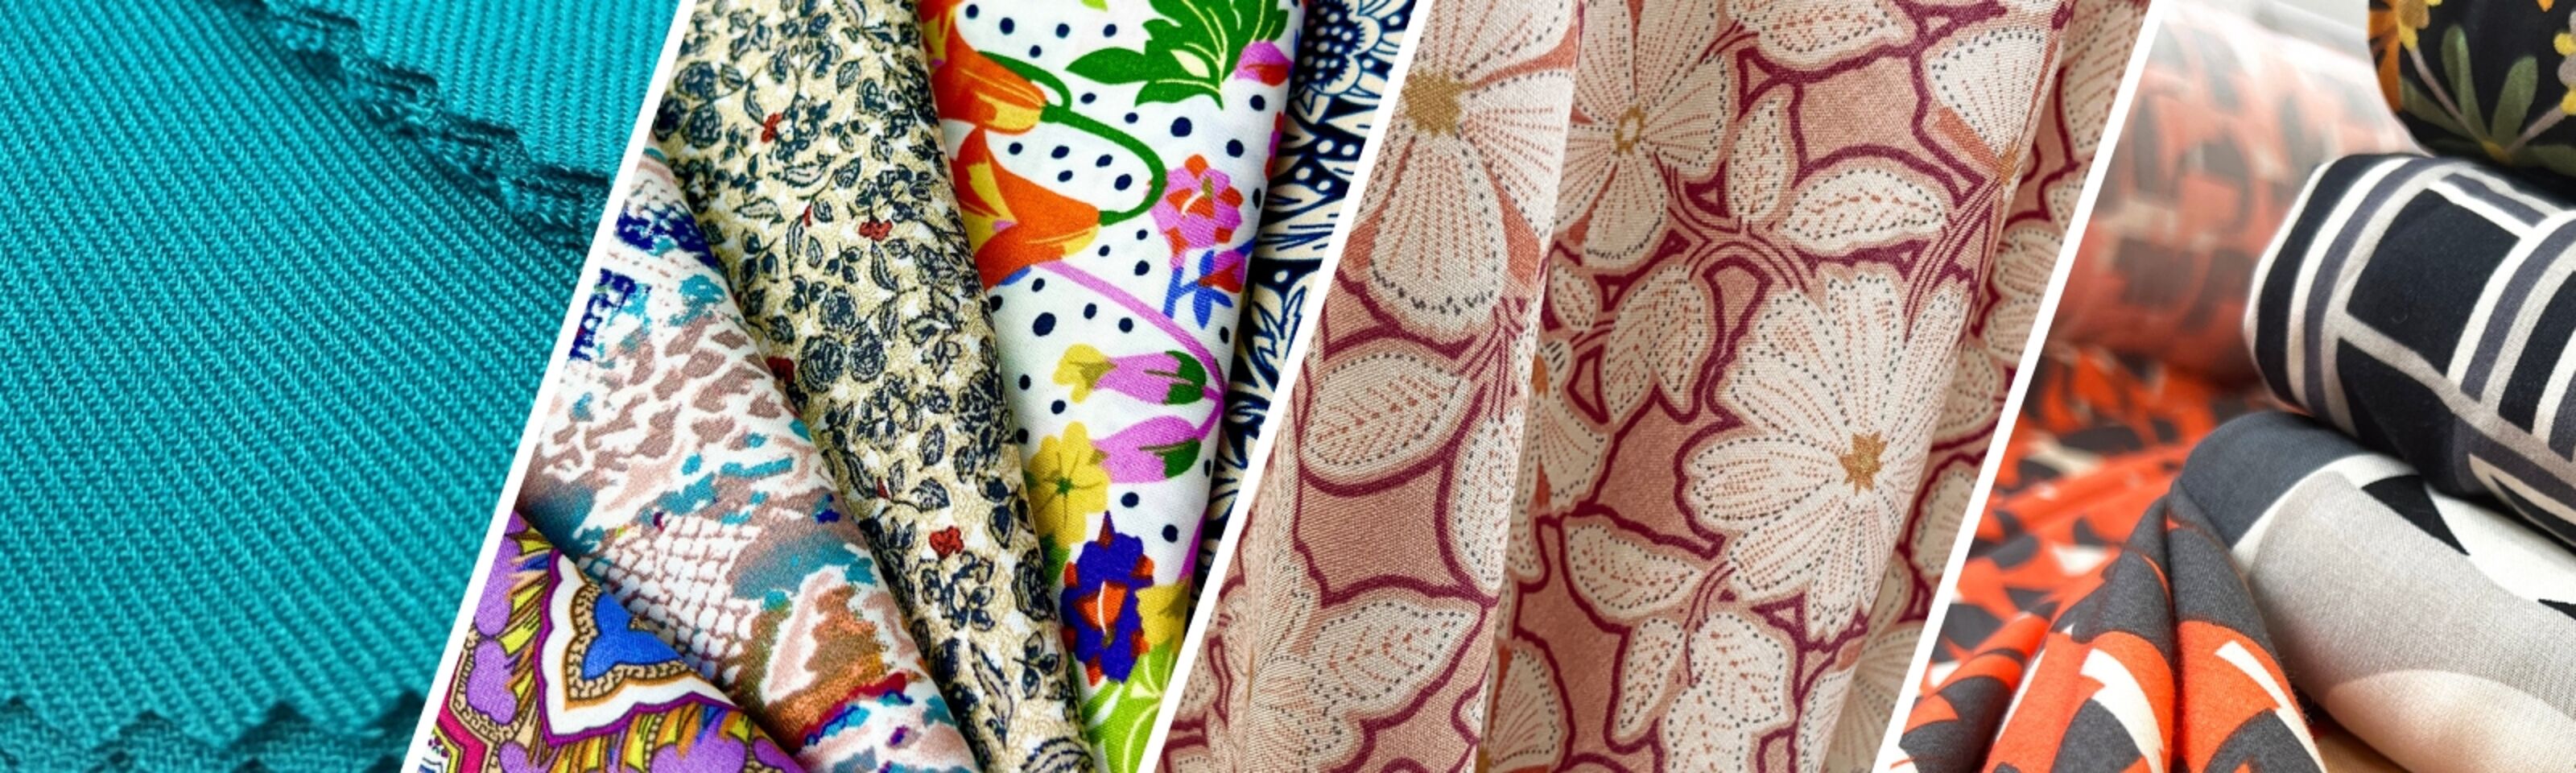 Viscose Fabric Guide - The Different Types of Viscose Weaves